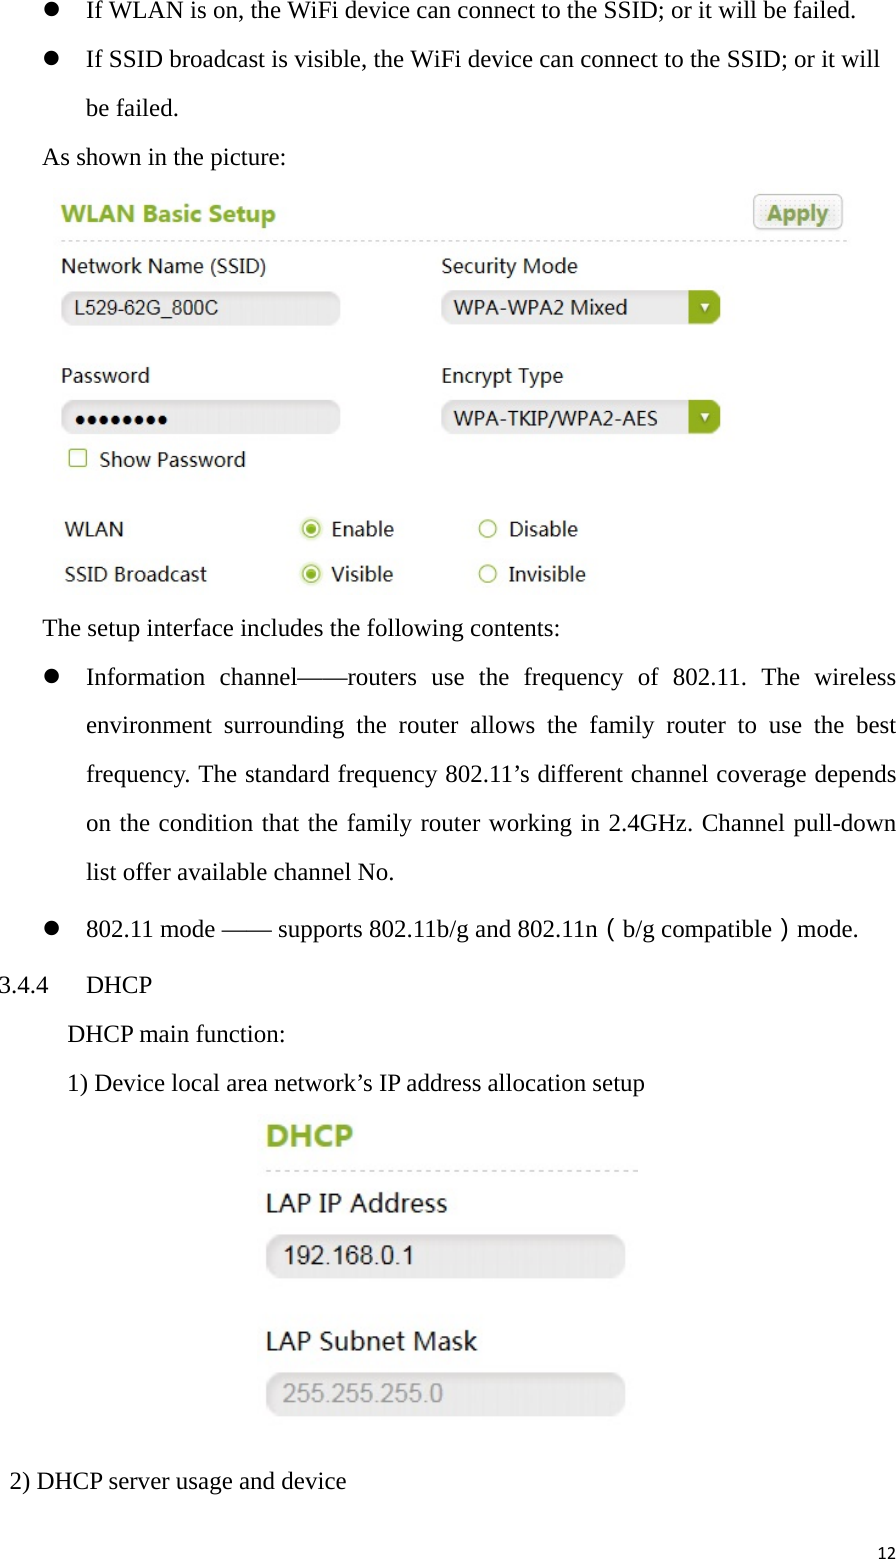 12 If WLAN is on, the WiFi device can connect to the SSID; or it will be failed.  If SSID broadcast is visible, the WiFi device can connect to the SSID; or it will be failed. As shown in the picture:  The setup interface includes the following contents:    Information channel——routers use the frequency of 802.11. The wireless environment surrounding the router allows the family router to use the best frequency. The standard frequency 802.11’s different channel coverage depends on the condition that the family router working in 2.4GHz. Channel pull-down list offer available channel No.  802.11 mode —— supports 802.11b/g and 802.11n（b/g compatible）mode. 3.4.4 DHCP   DHCP main function:     1) Device local area network’s IP address allocation setup    2) DHCP server usage and device 